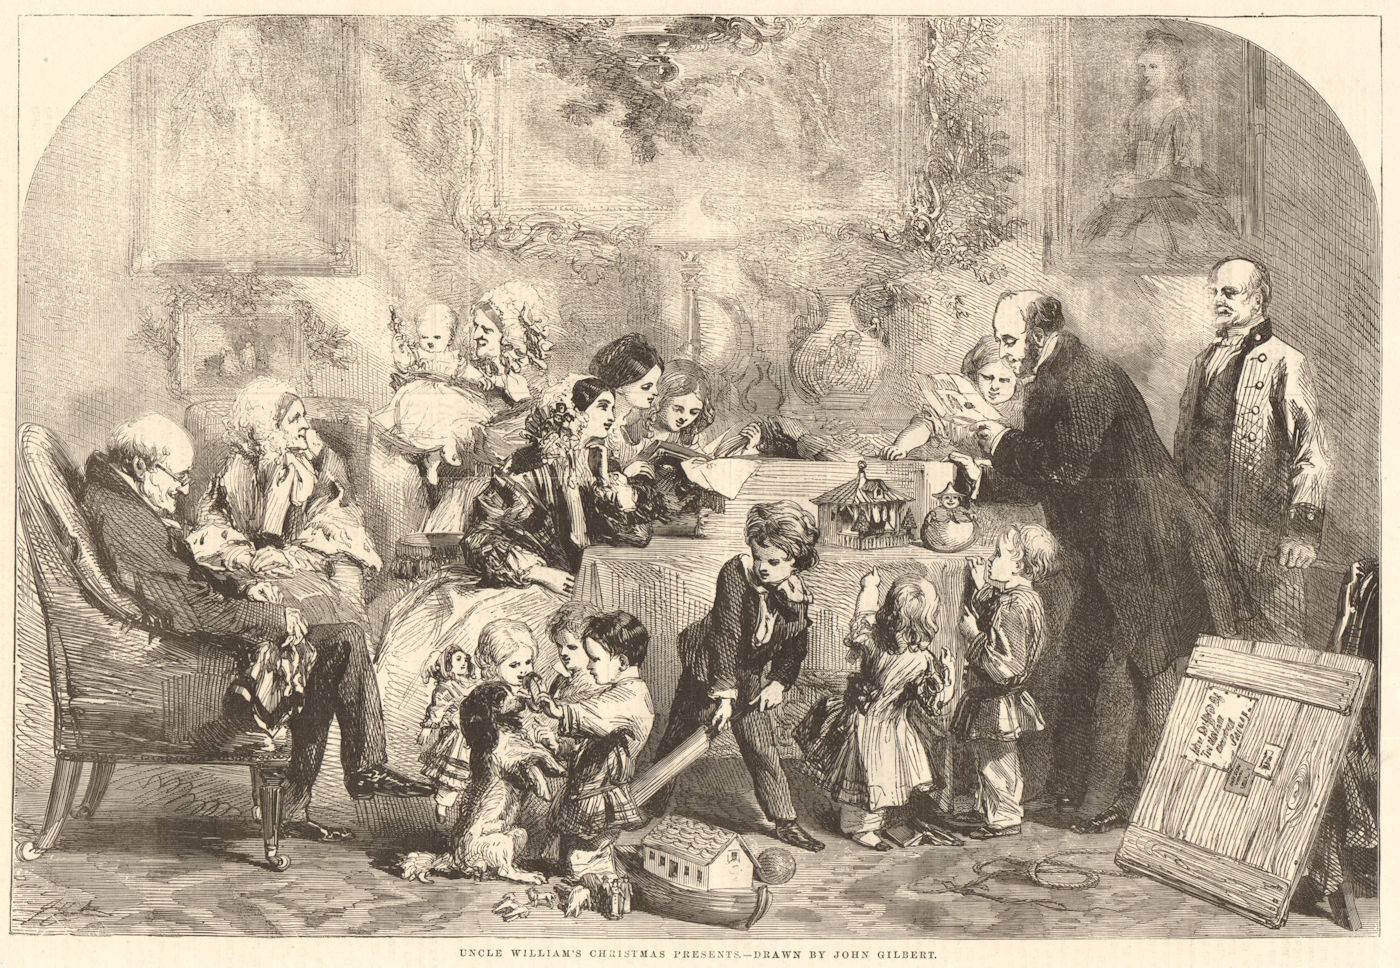 Uncle William's Christmas presents - drawn by John Gilbert. Family 1856 print